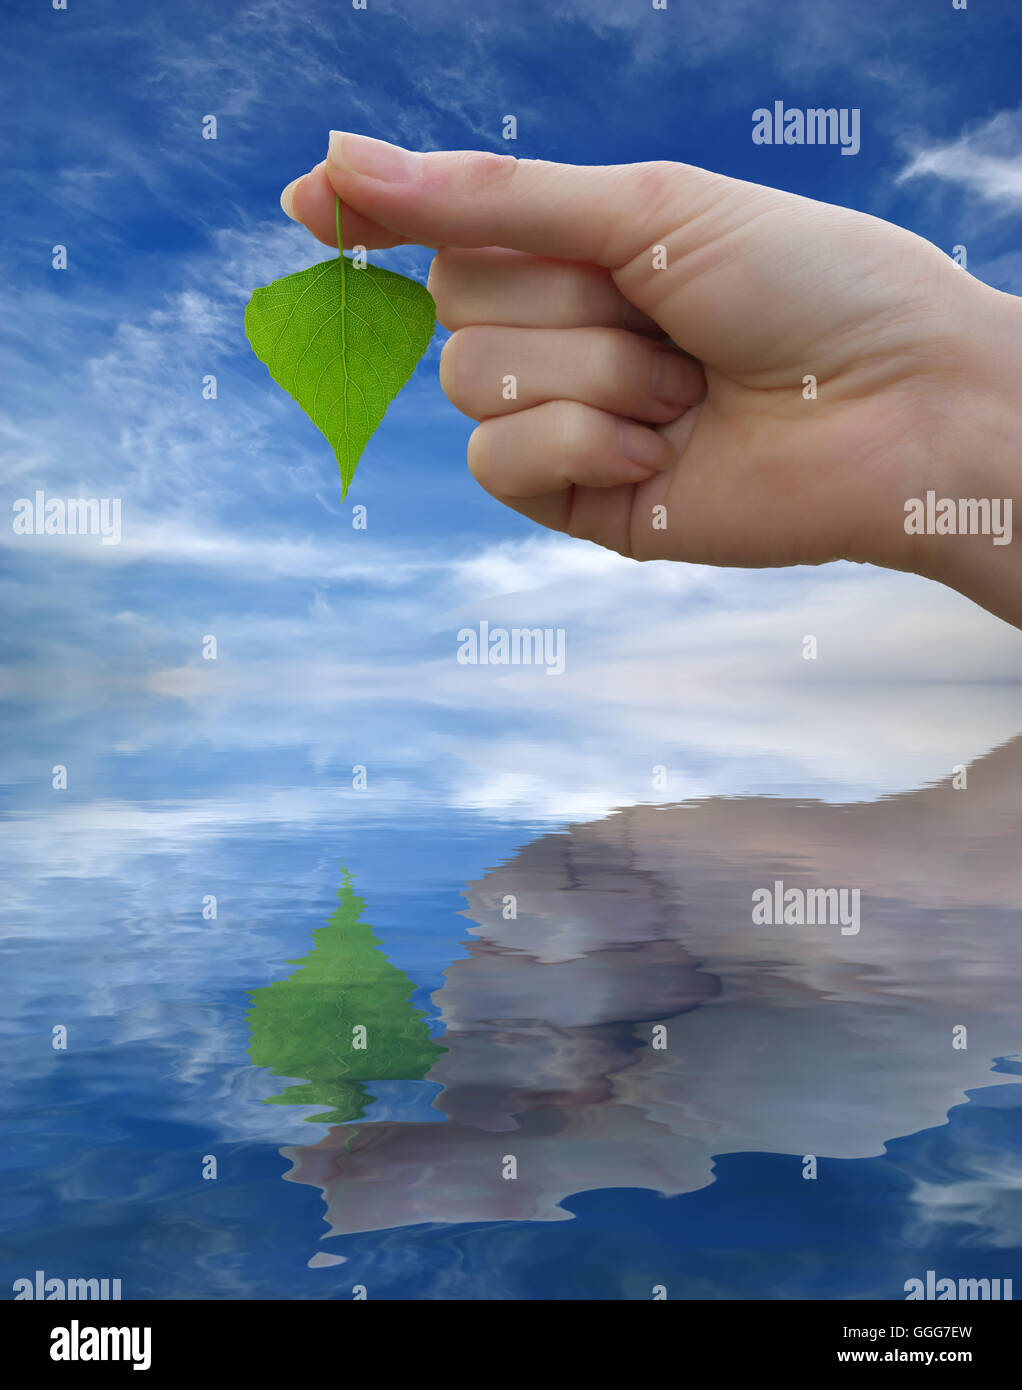 green leaf in hand and reflection in water Stock Photo